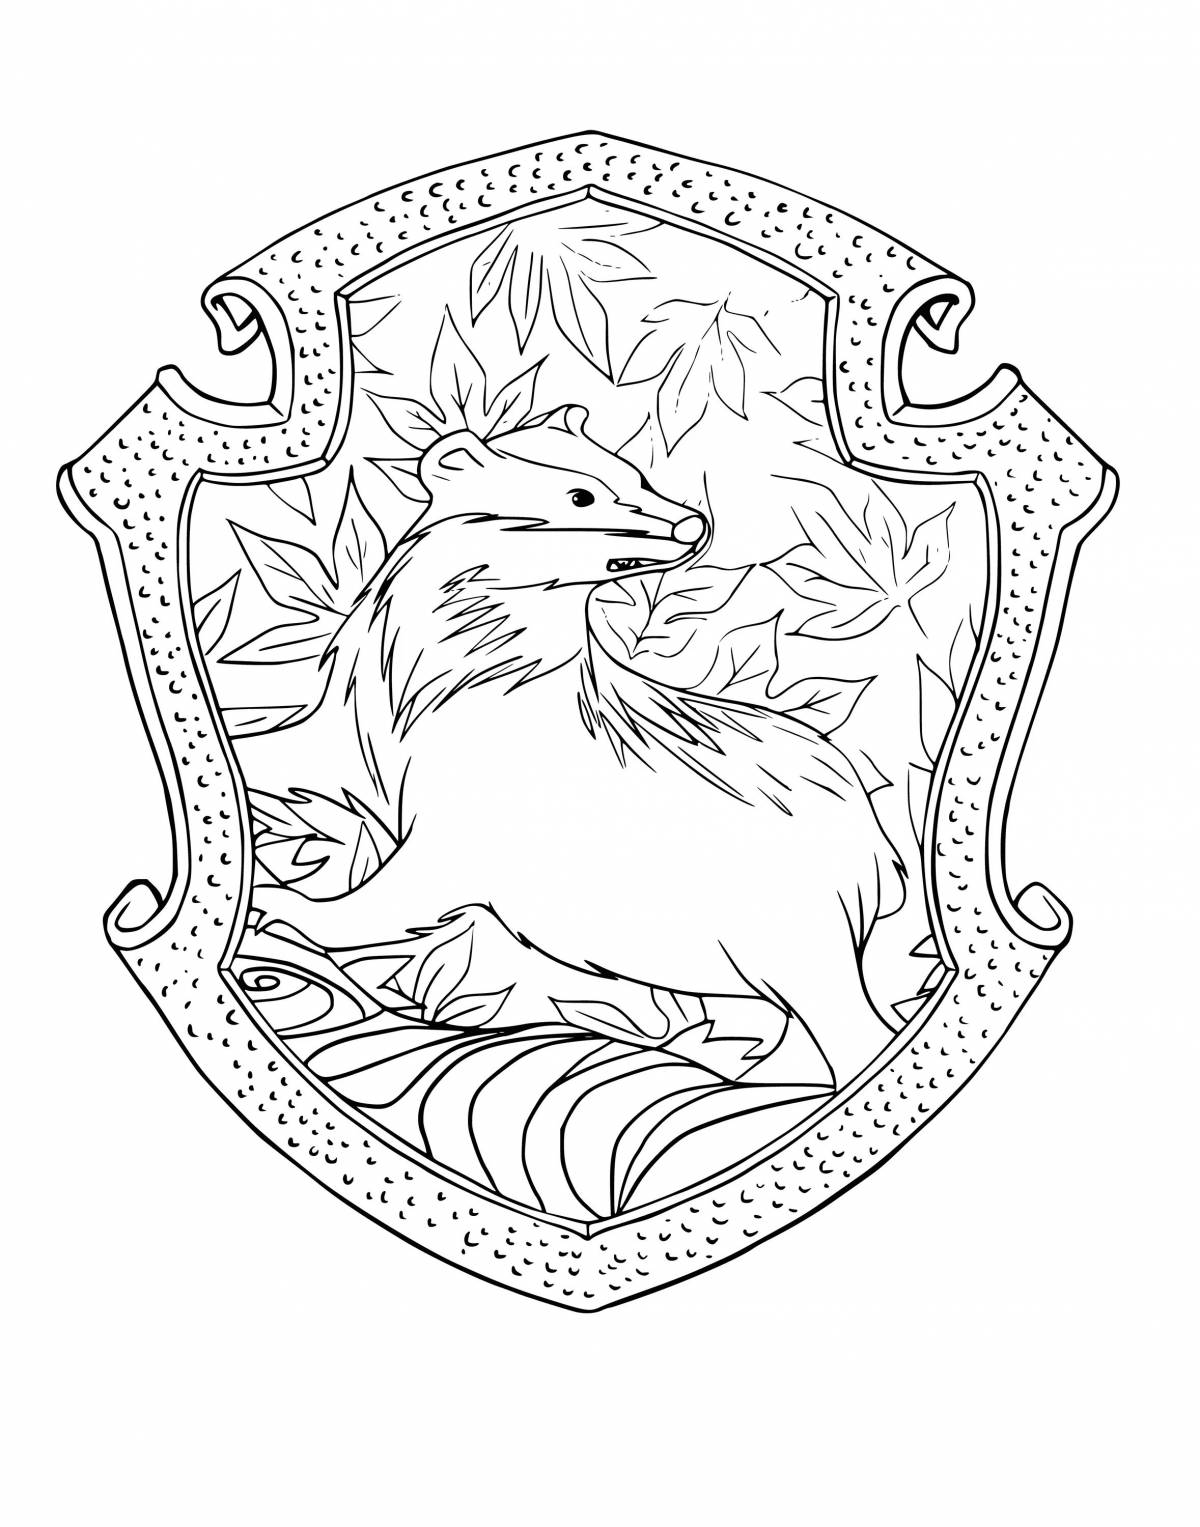 Colouring coloring coat of arms of Hogwarts